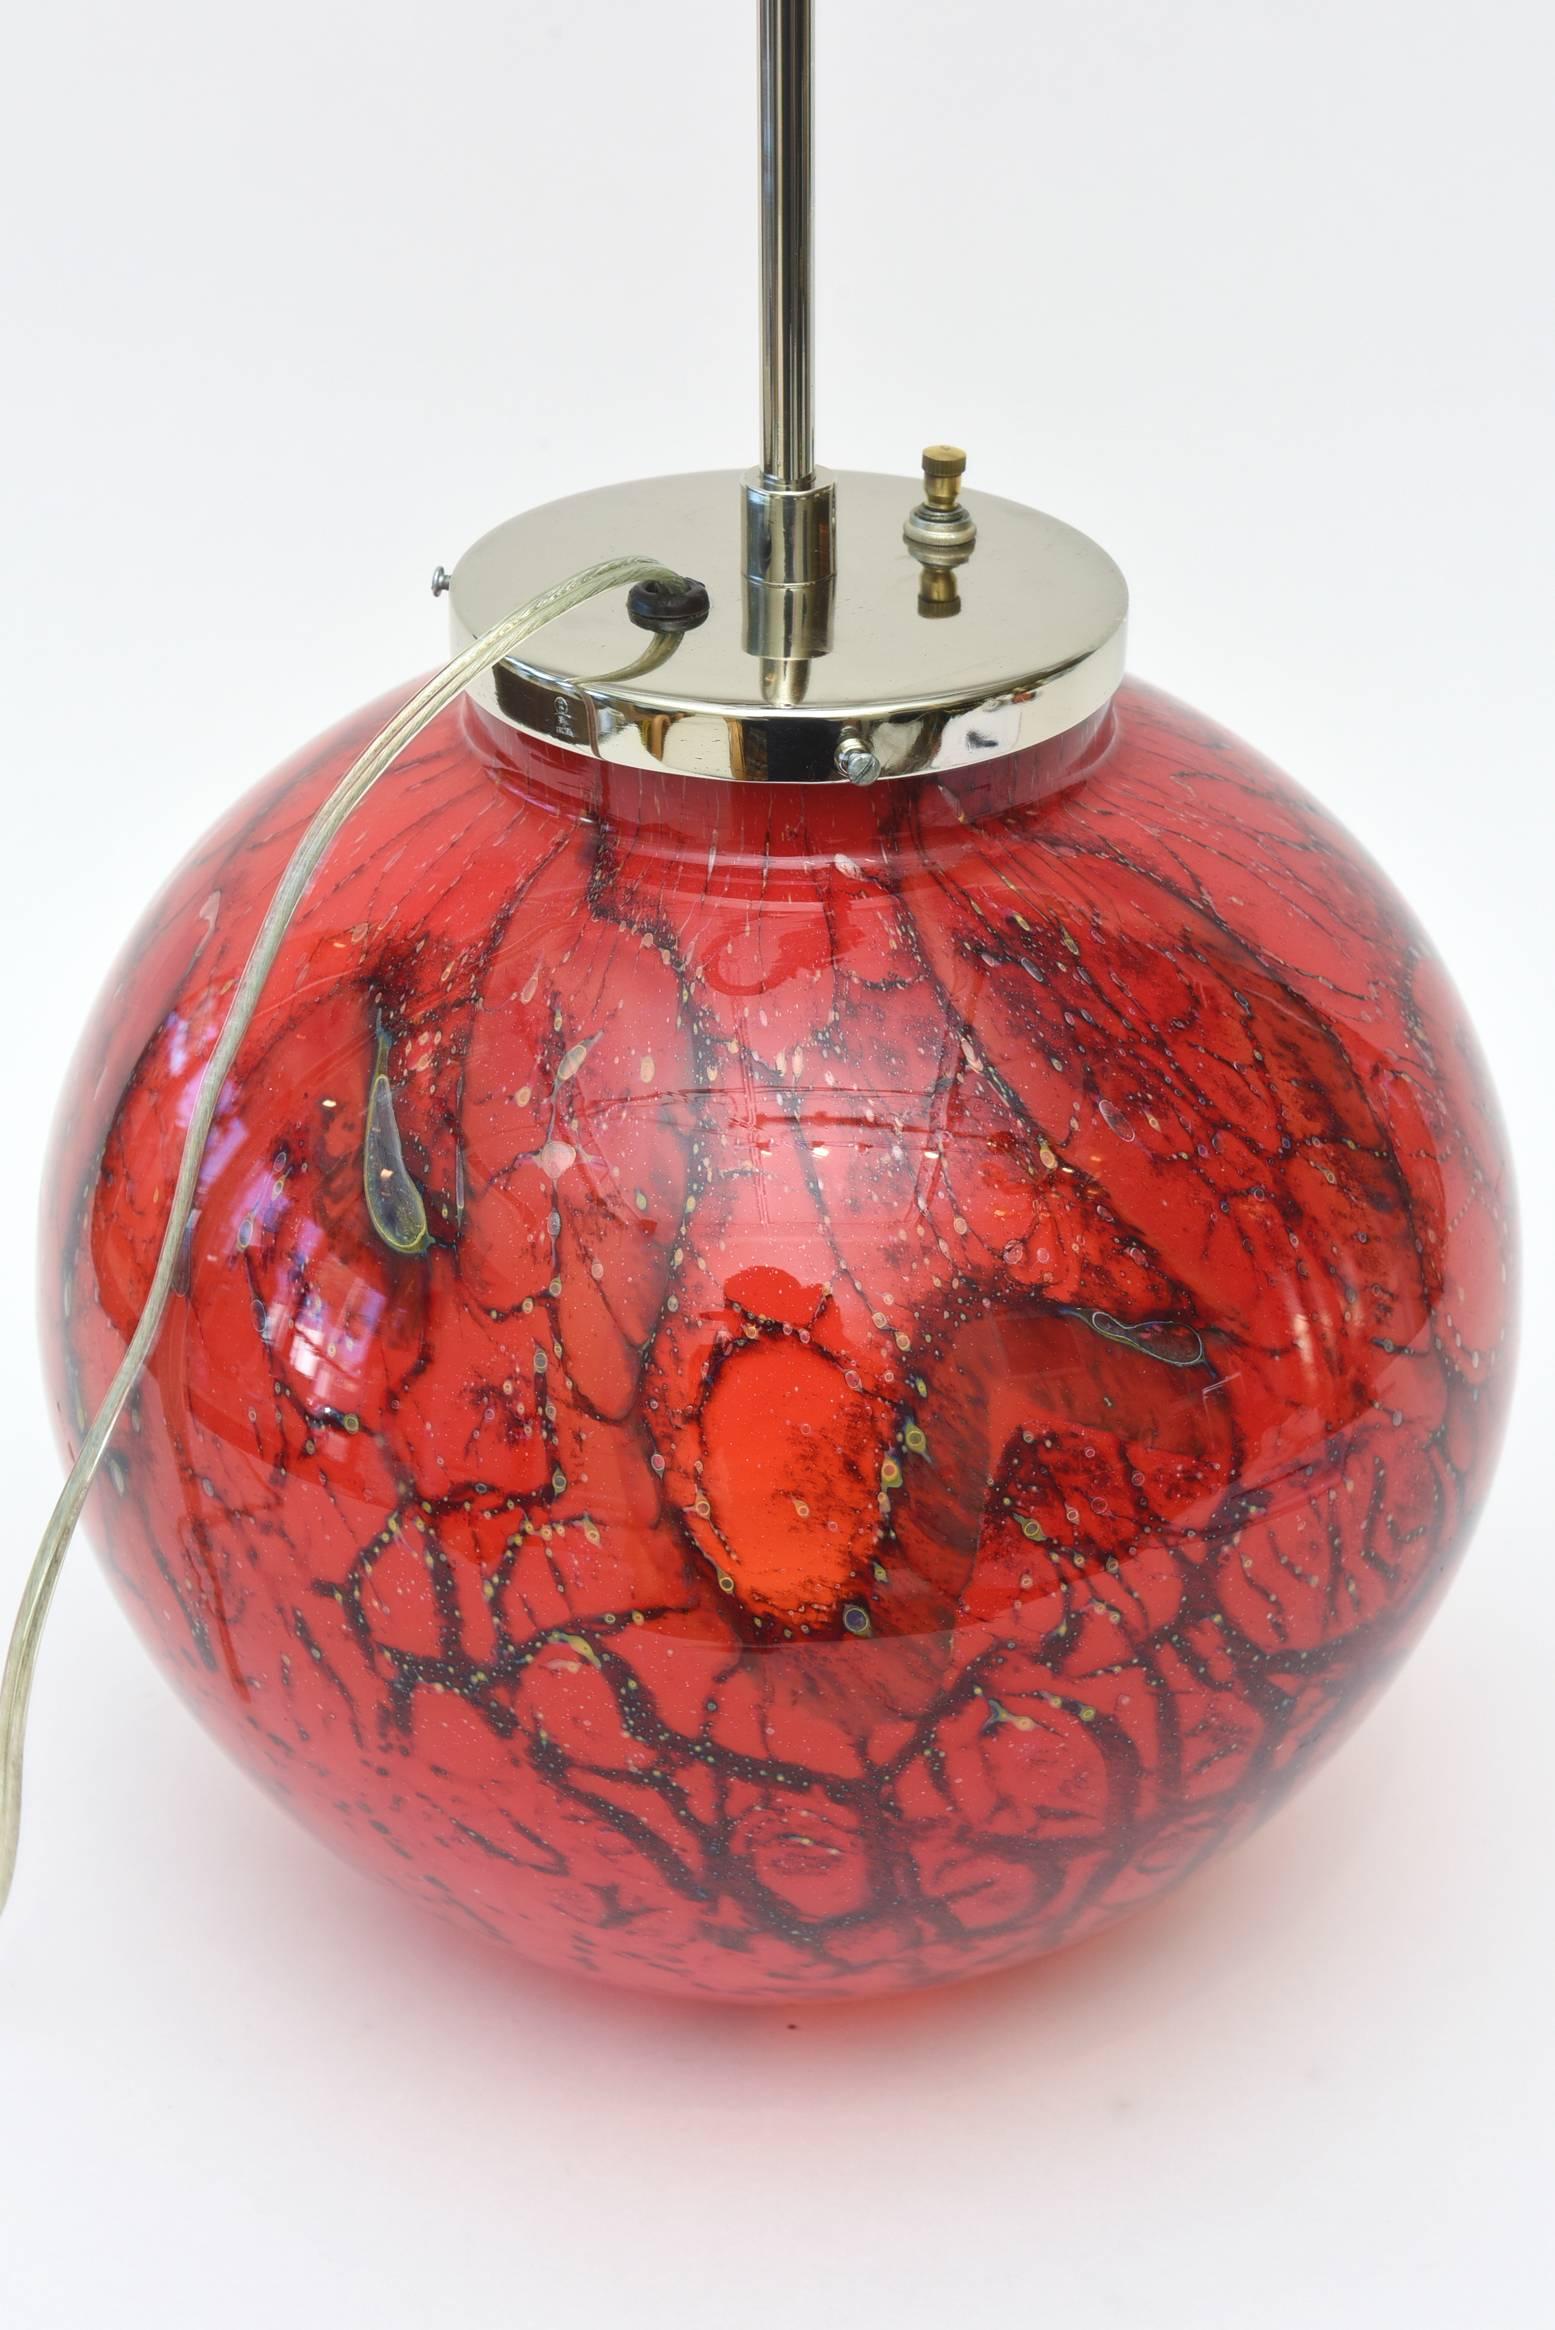 Vintage Wmf Red, Orange, White Black Glass and Chrome Sphere Table or Desk Lamp In Good Condition For Sale In North Miami, FL